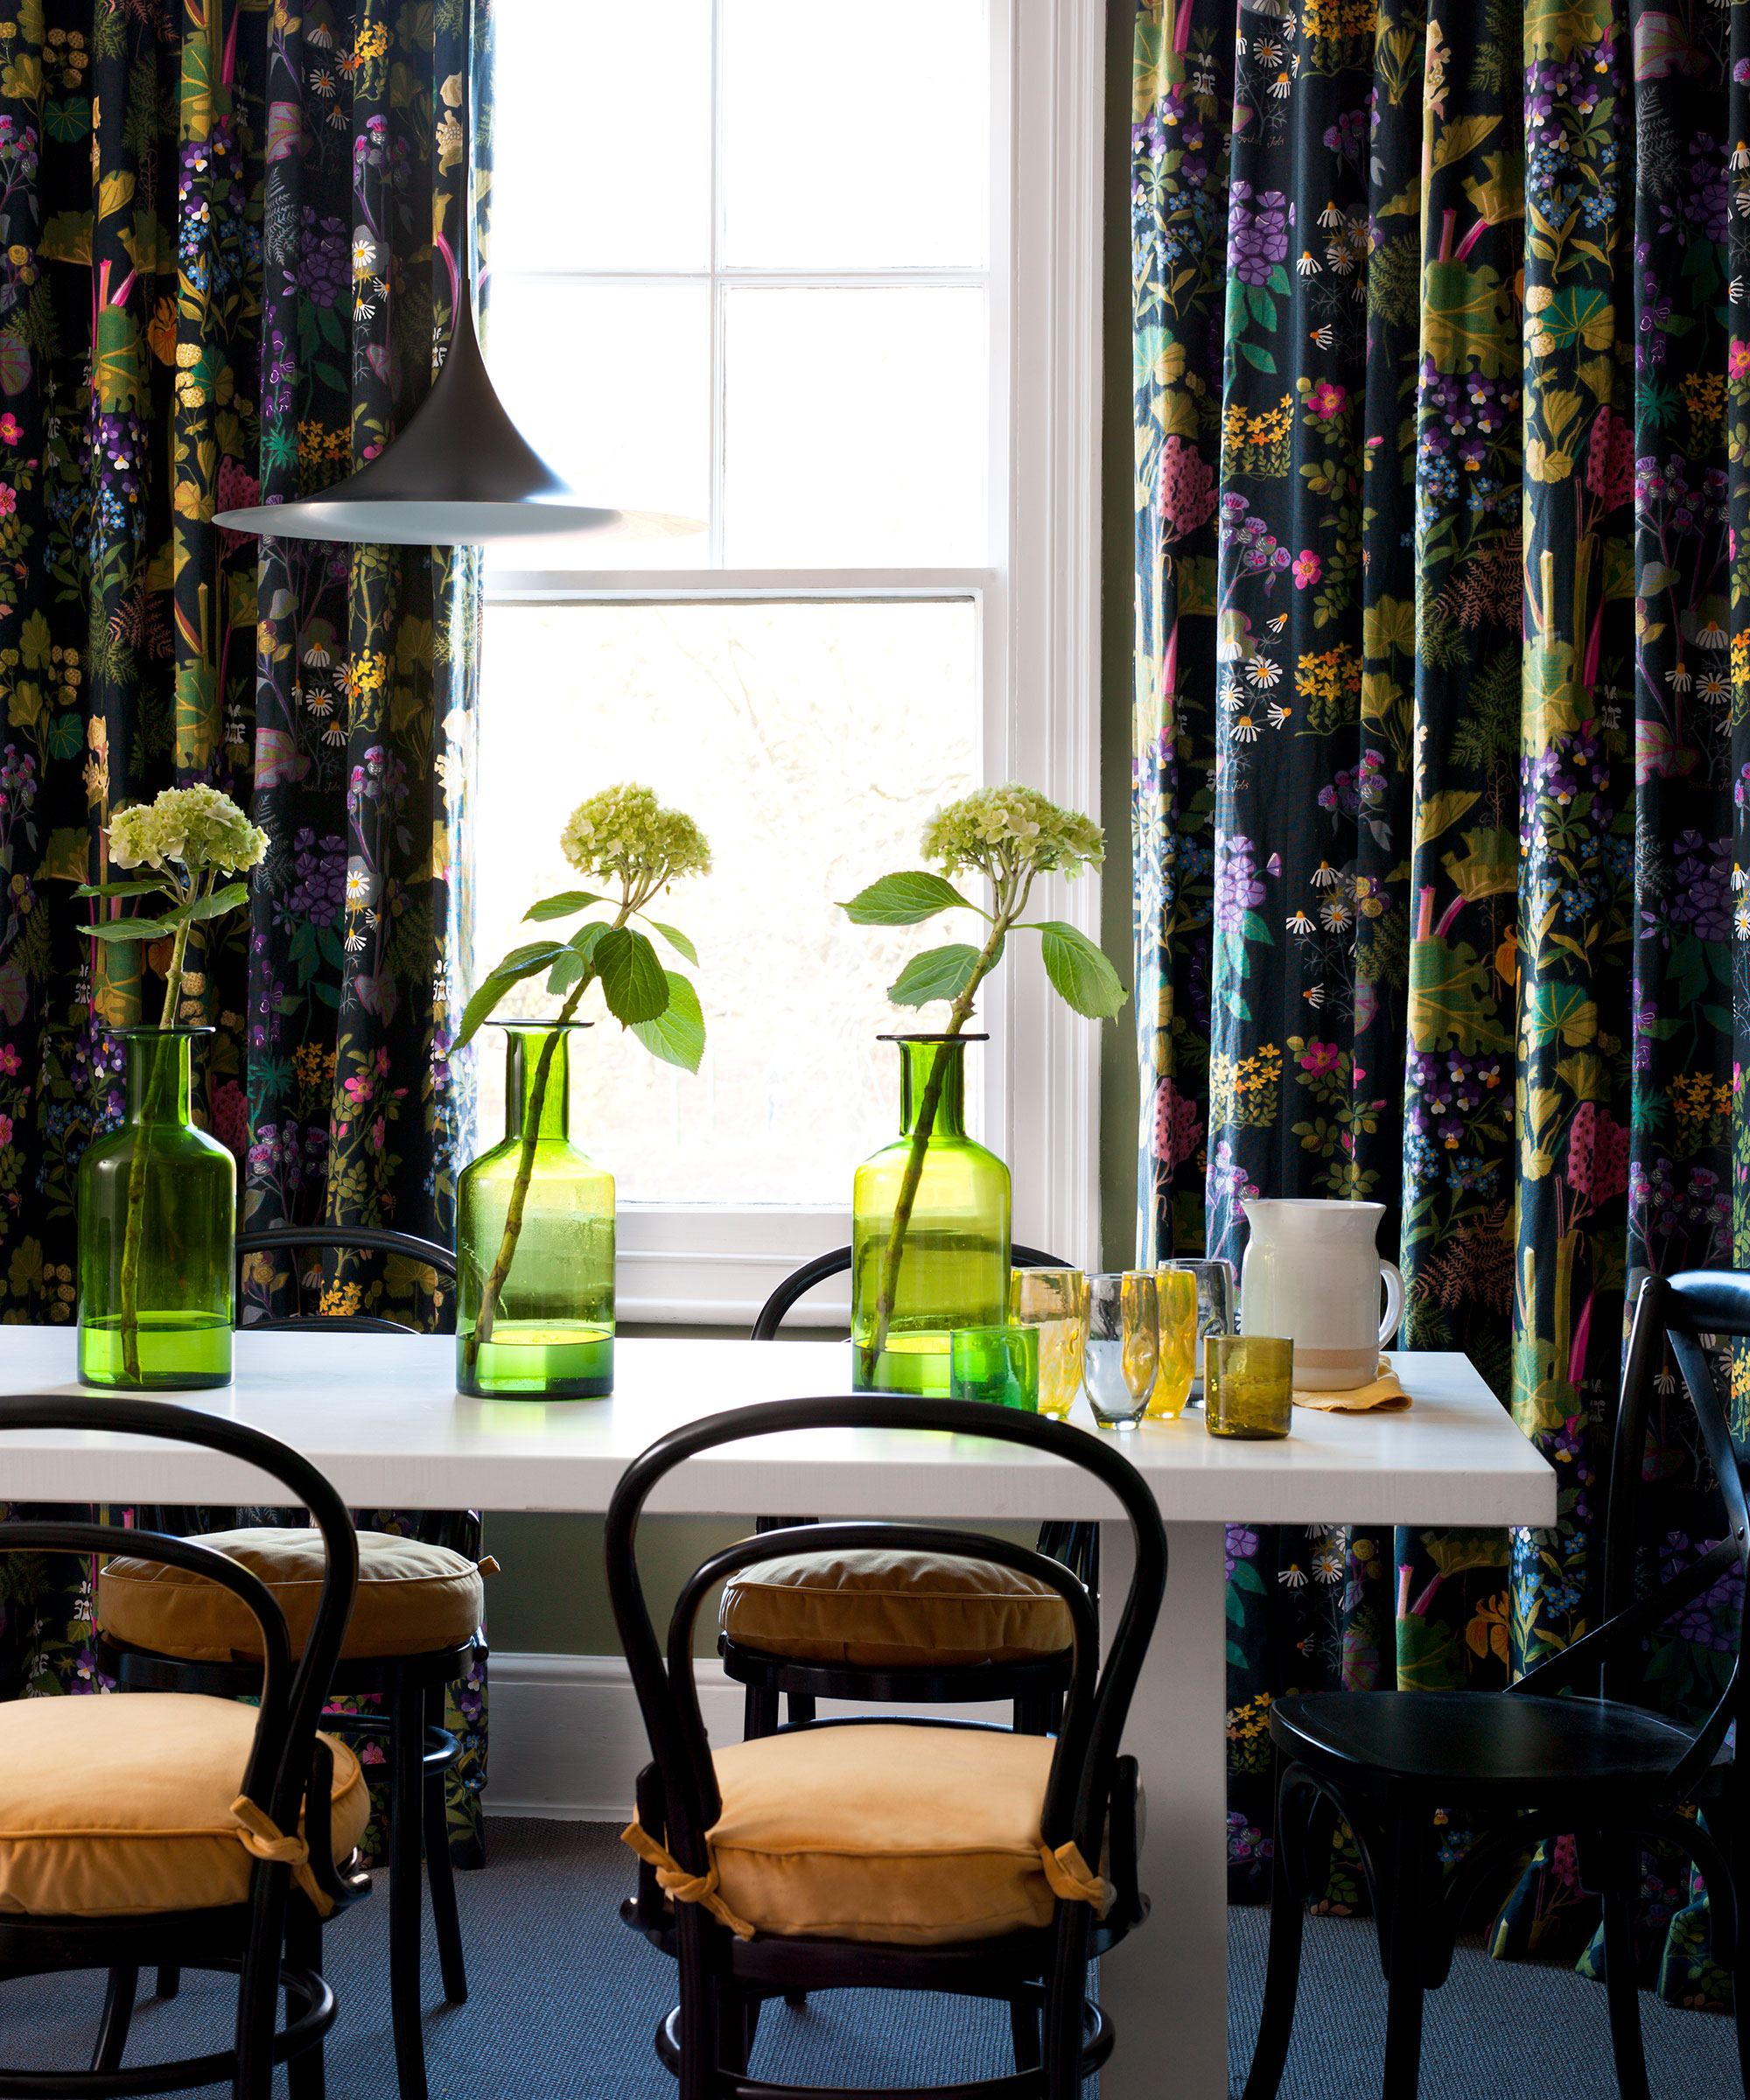 How to dress a dining table 7